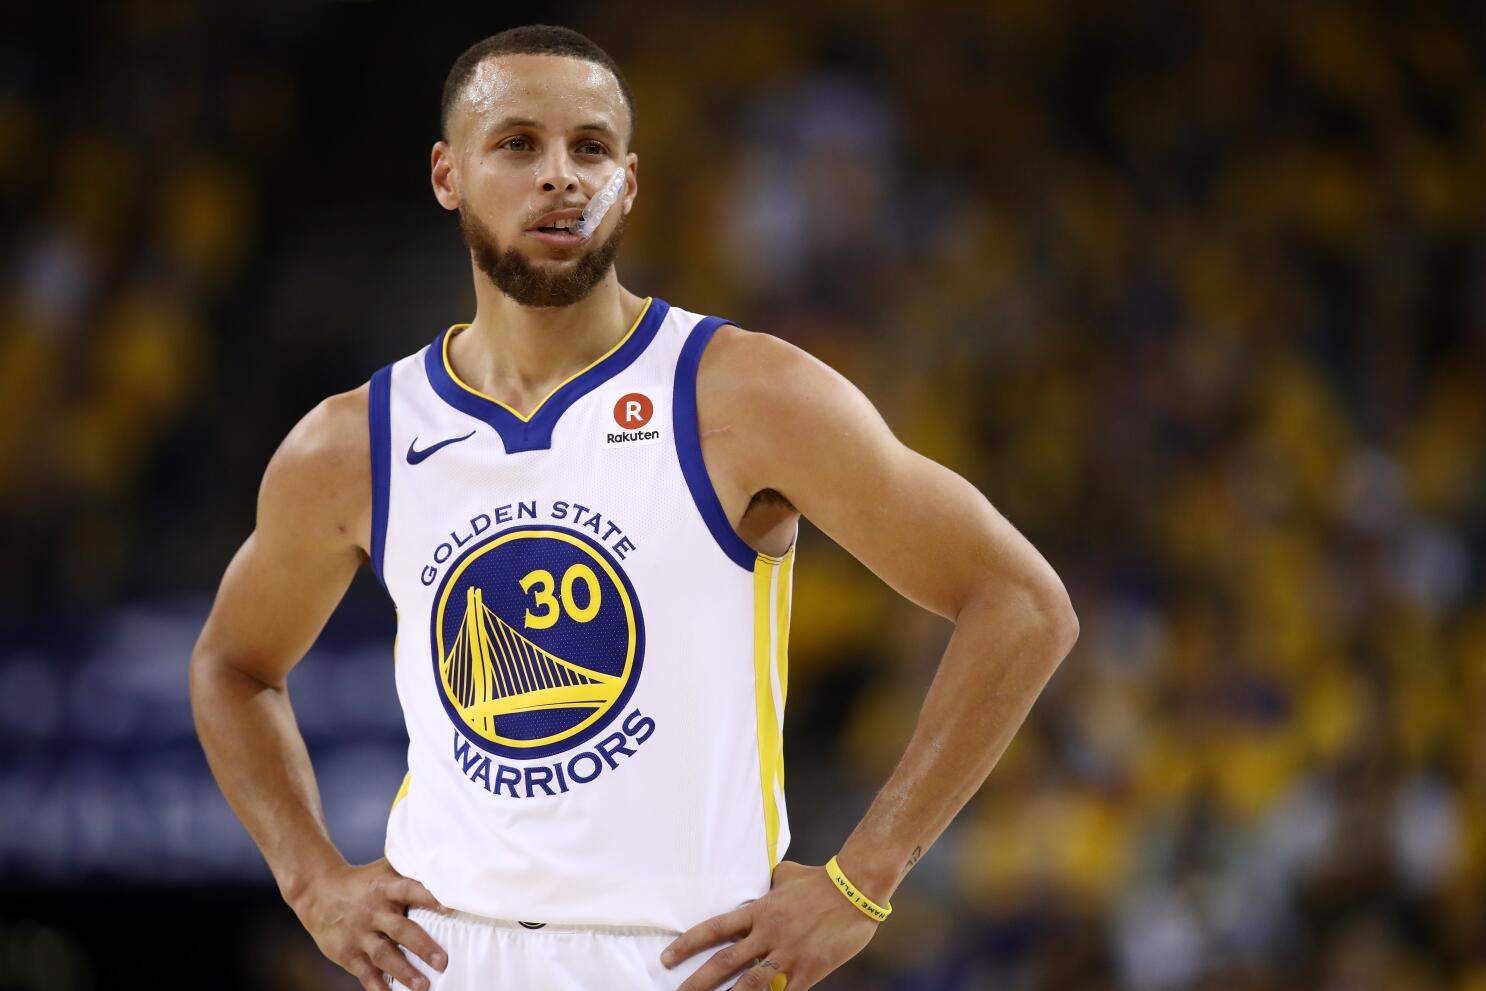 Stephen Curry's Underrated Tour set for L.A. stop on March 21-22